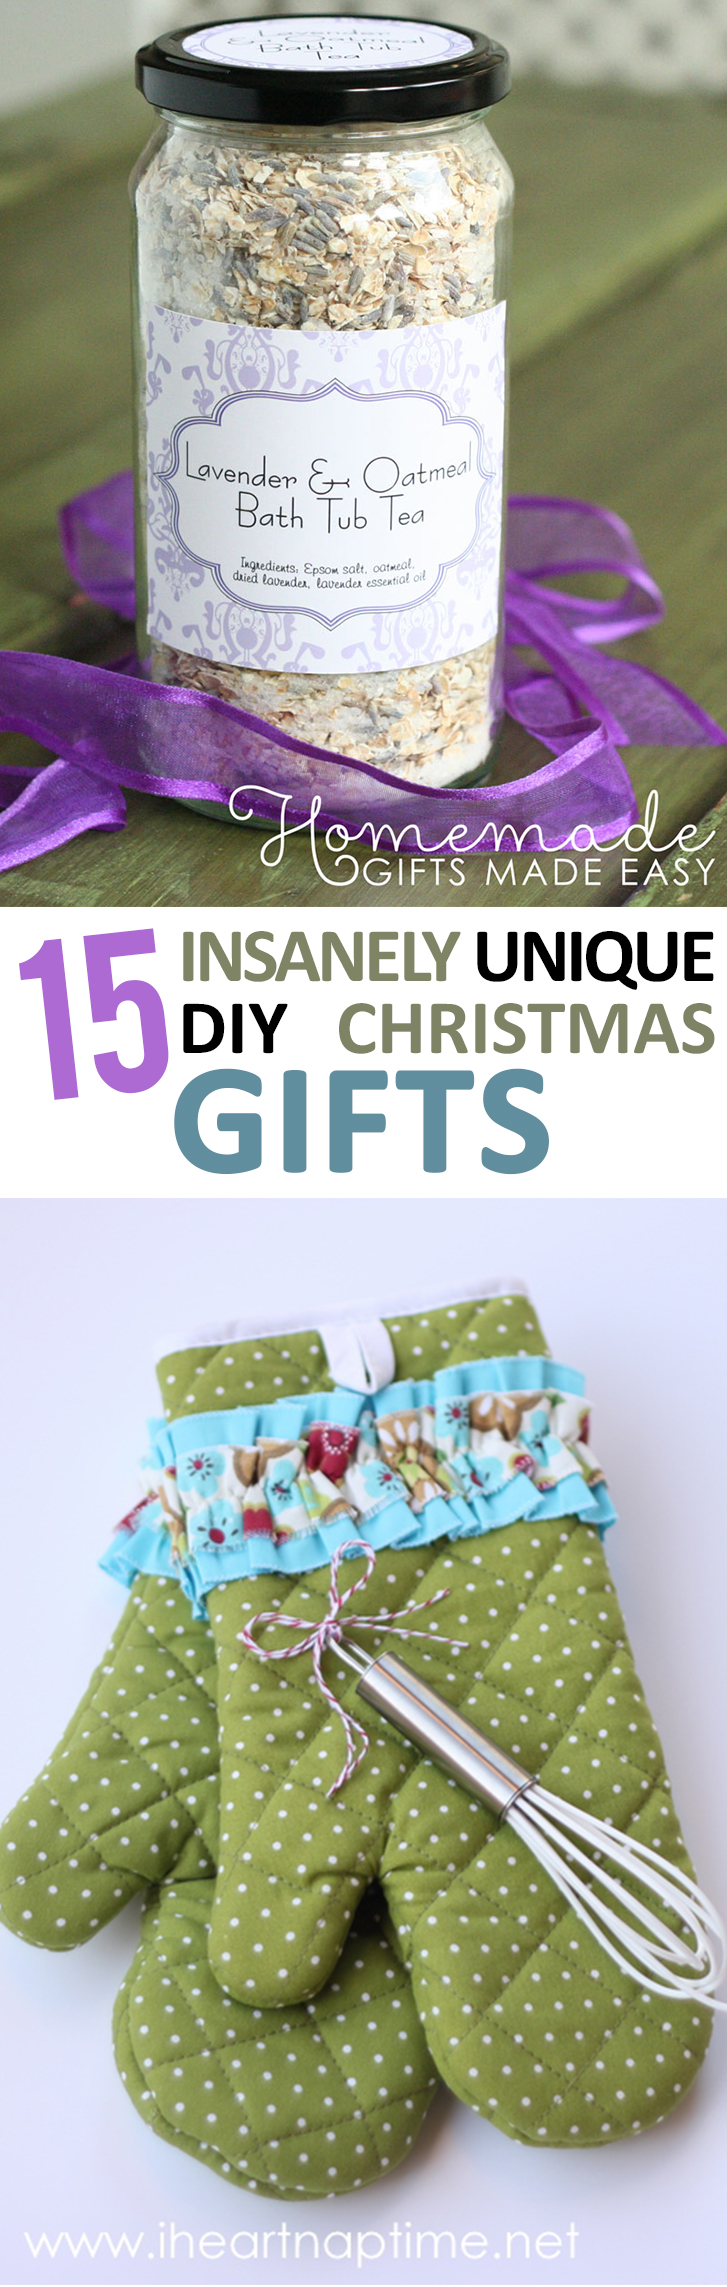 15 Insanely Unique DIY Christmas Gifts – Sunlit Spaces ...
